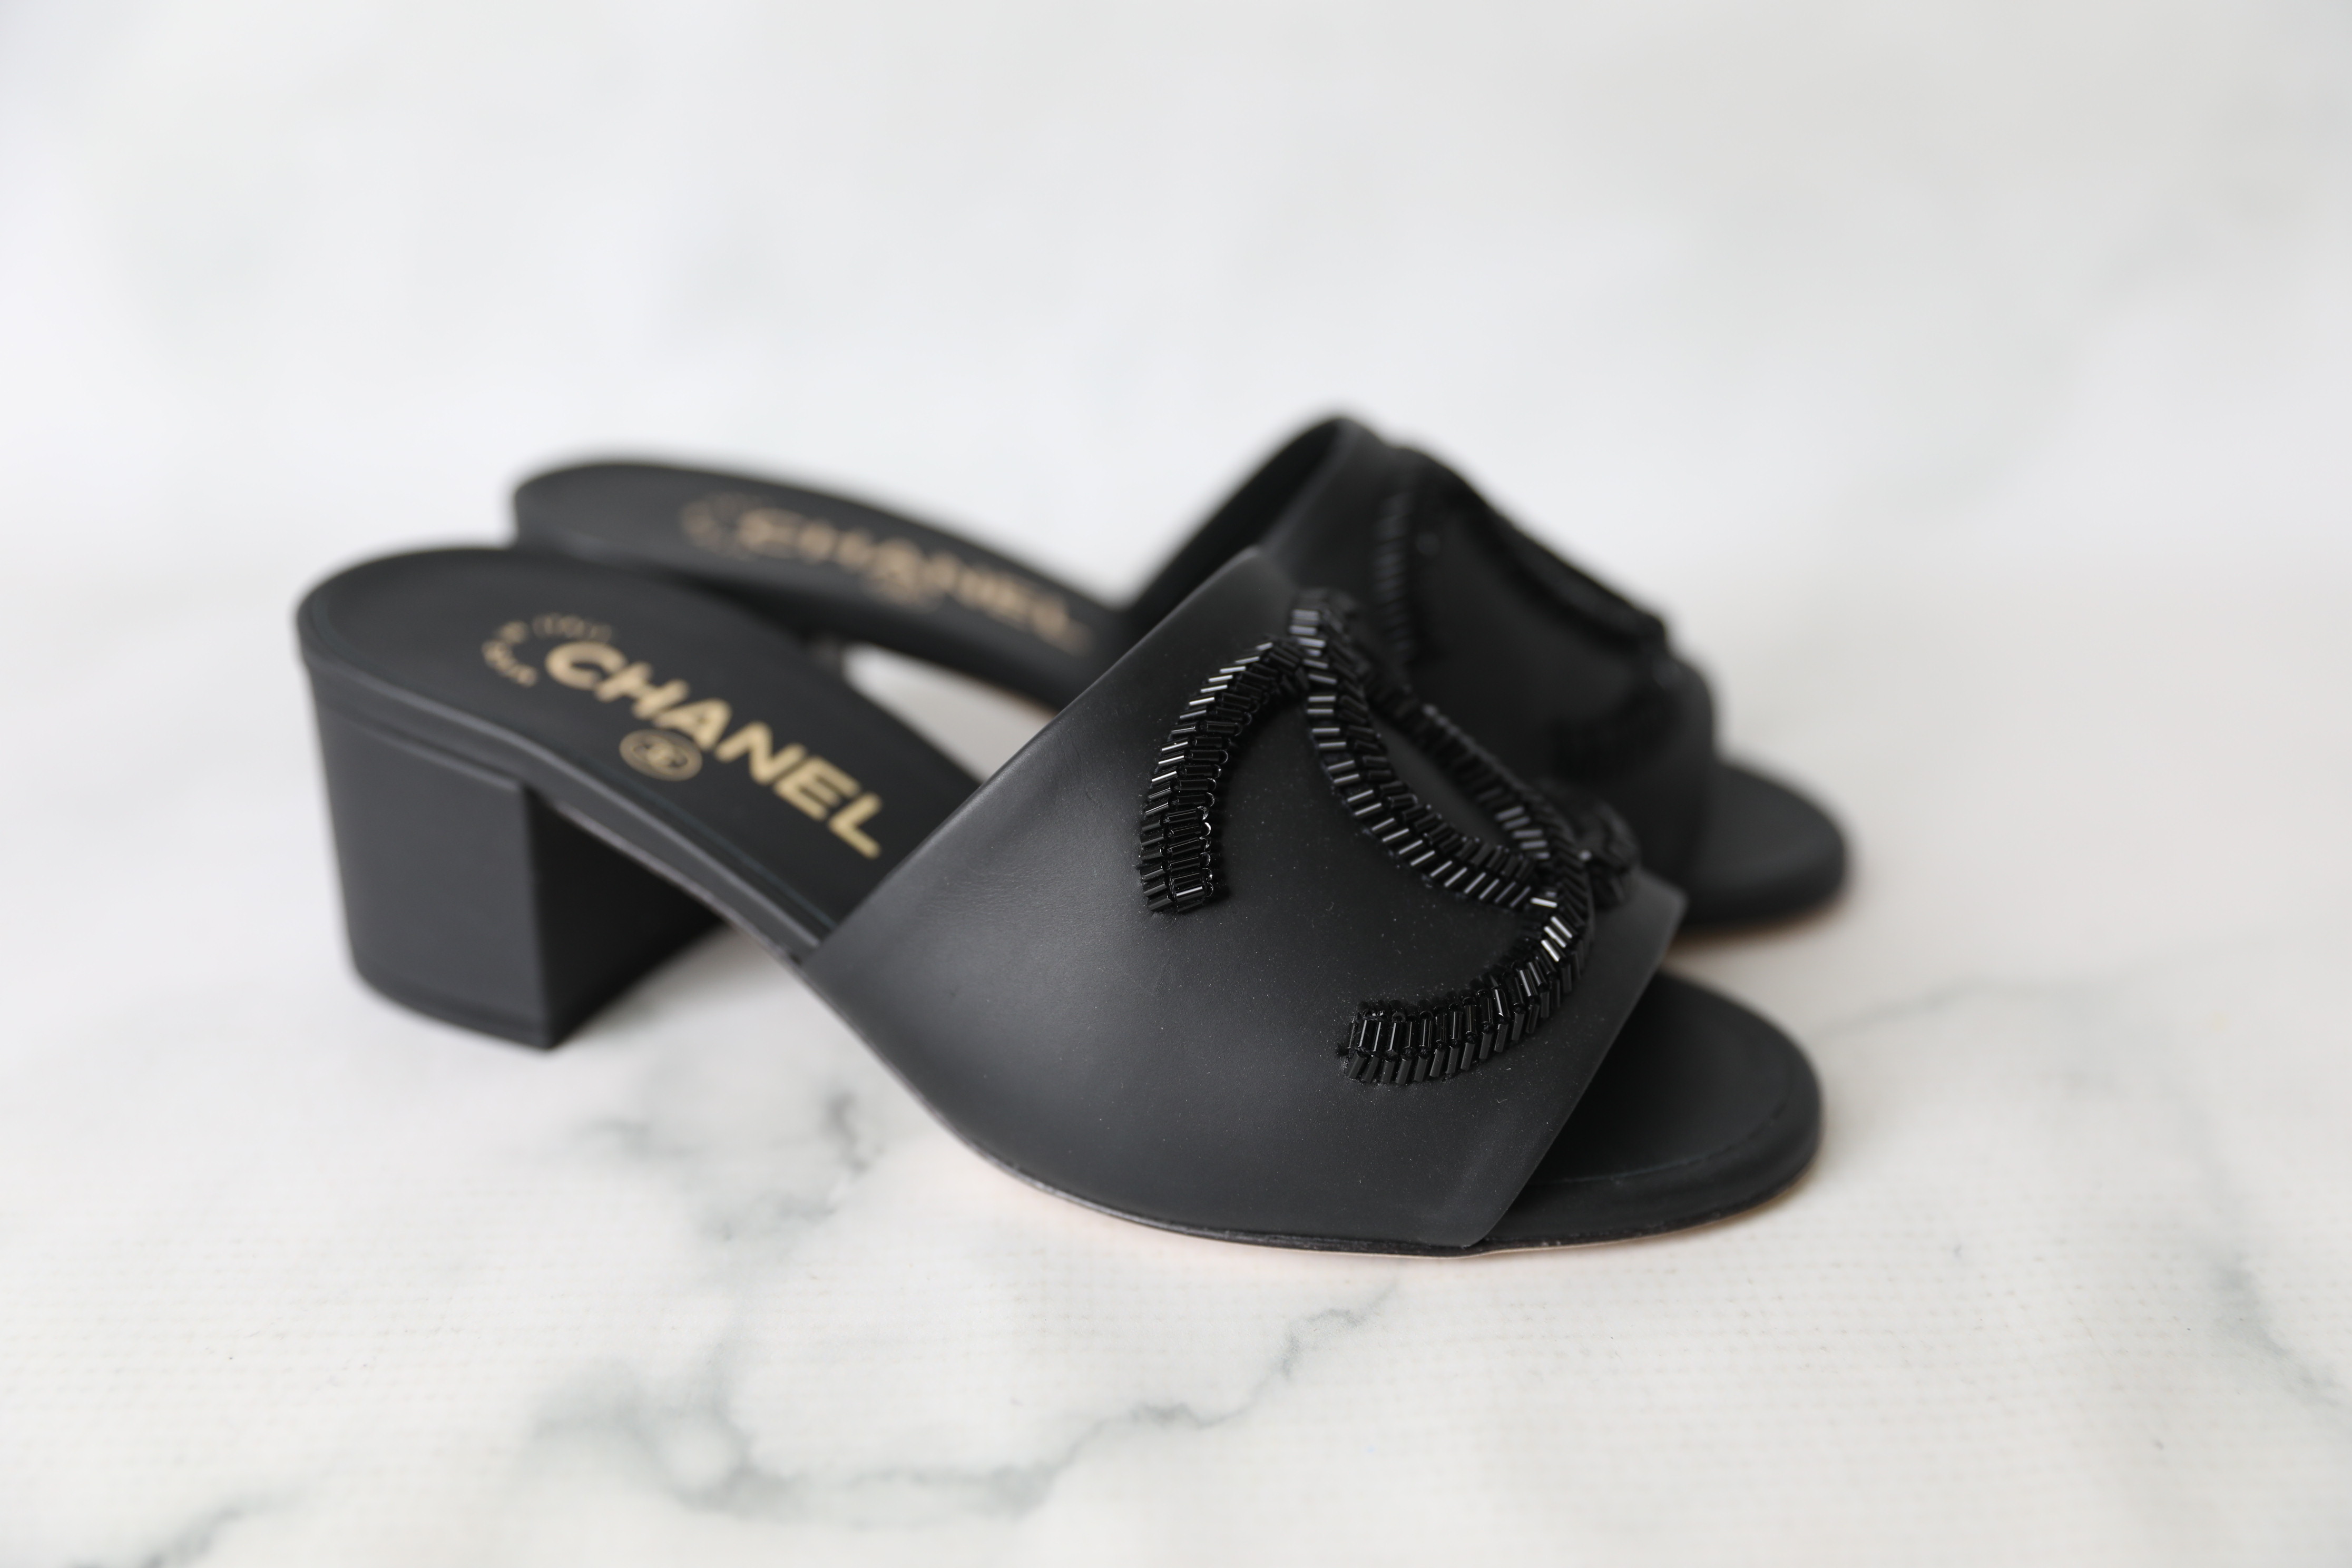 Chanel Shoes, Black with White CCs, Heels, Size 37, New in Box WA001 -  Julia Rose Boston